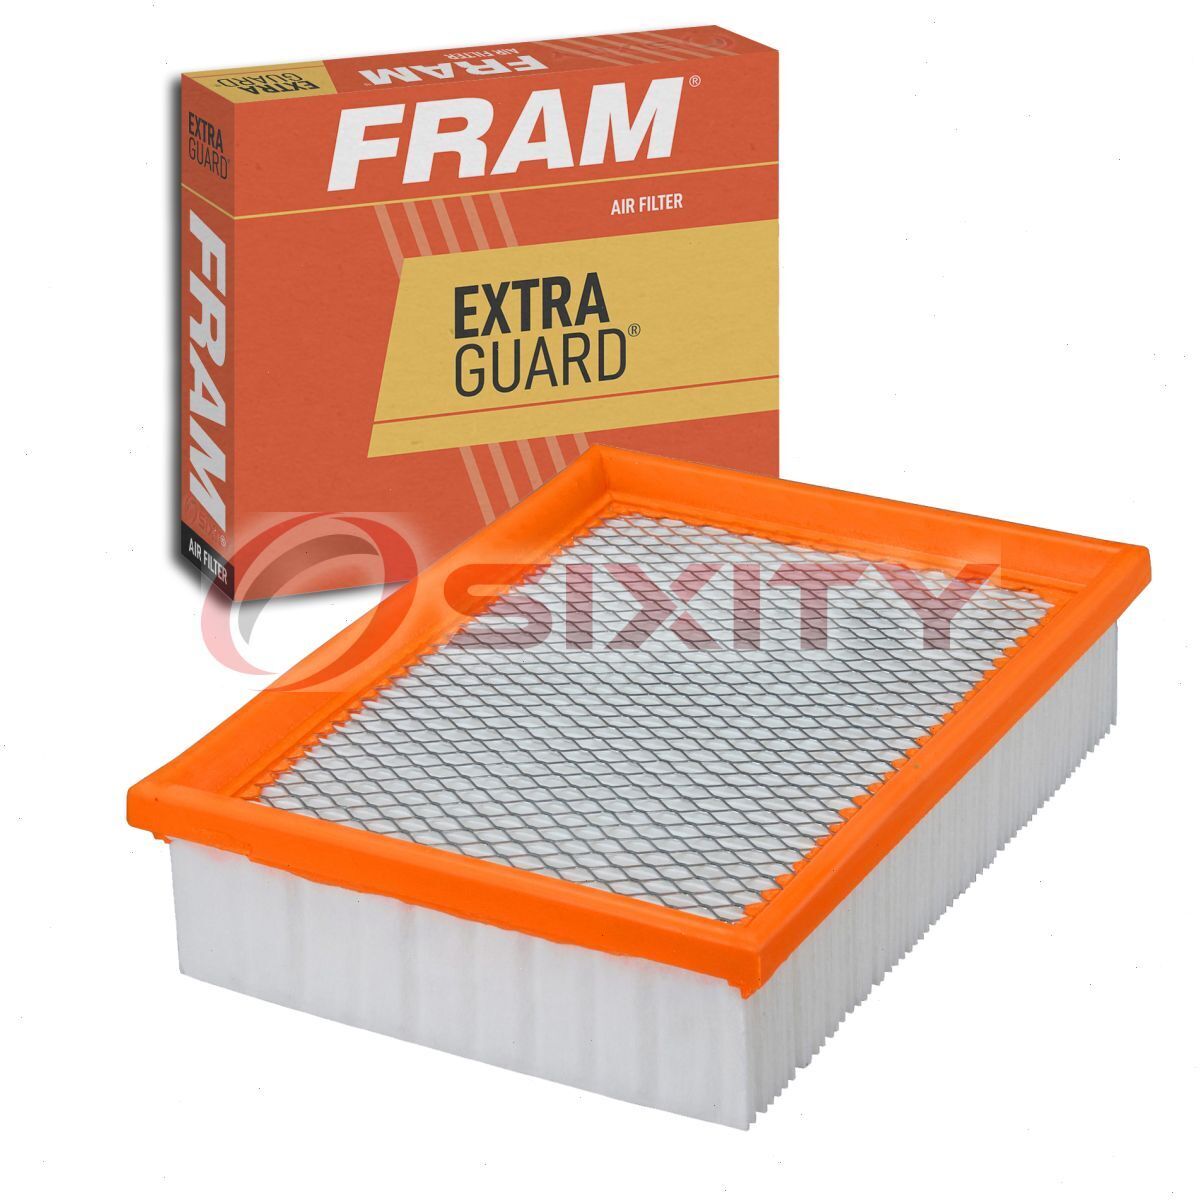 FRAM Extra Guard Air Filter for 2006-2012 Ford Fusion Intake Inlet Manifold ah